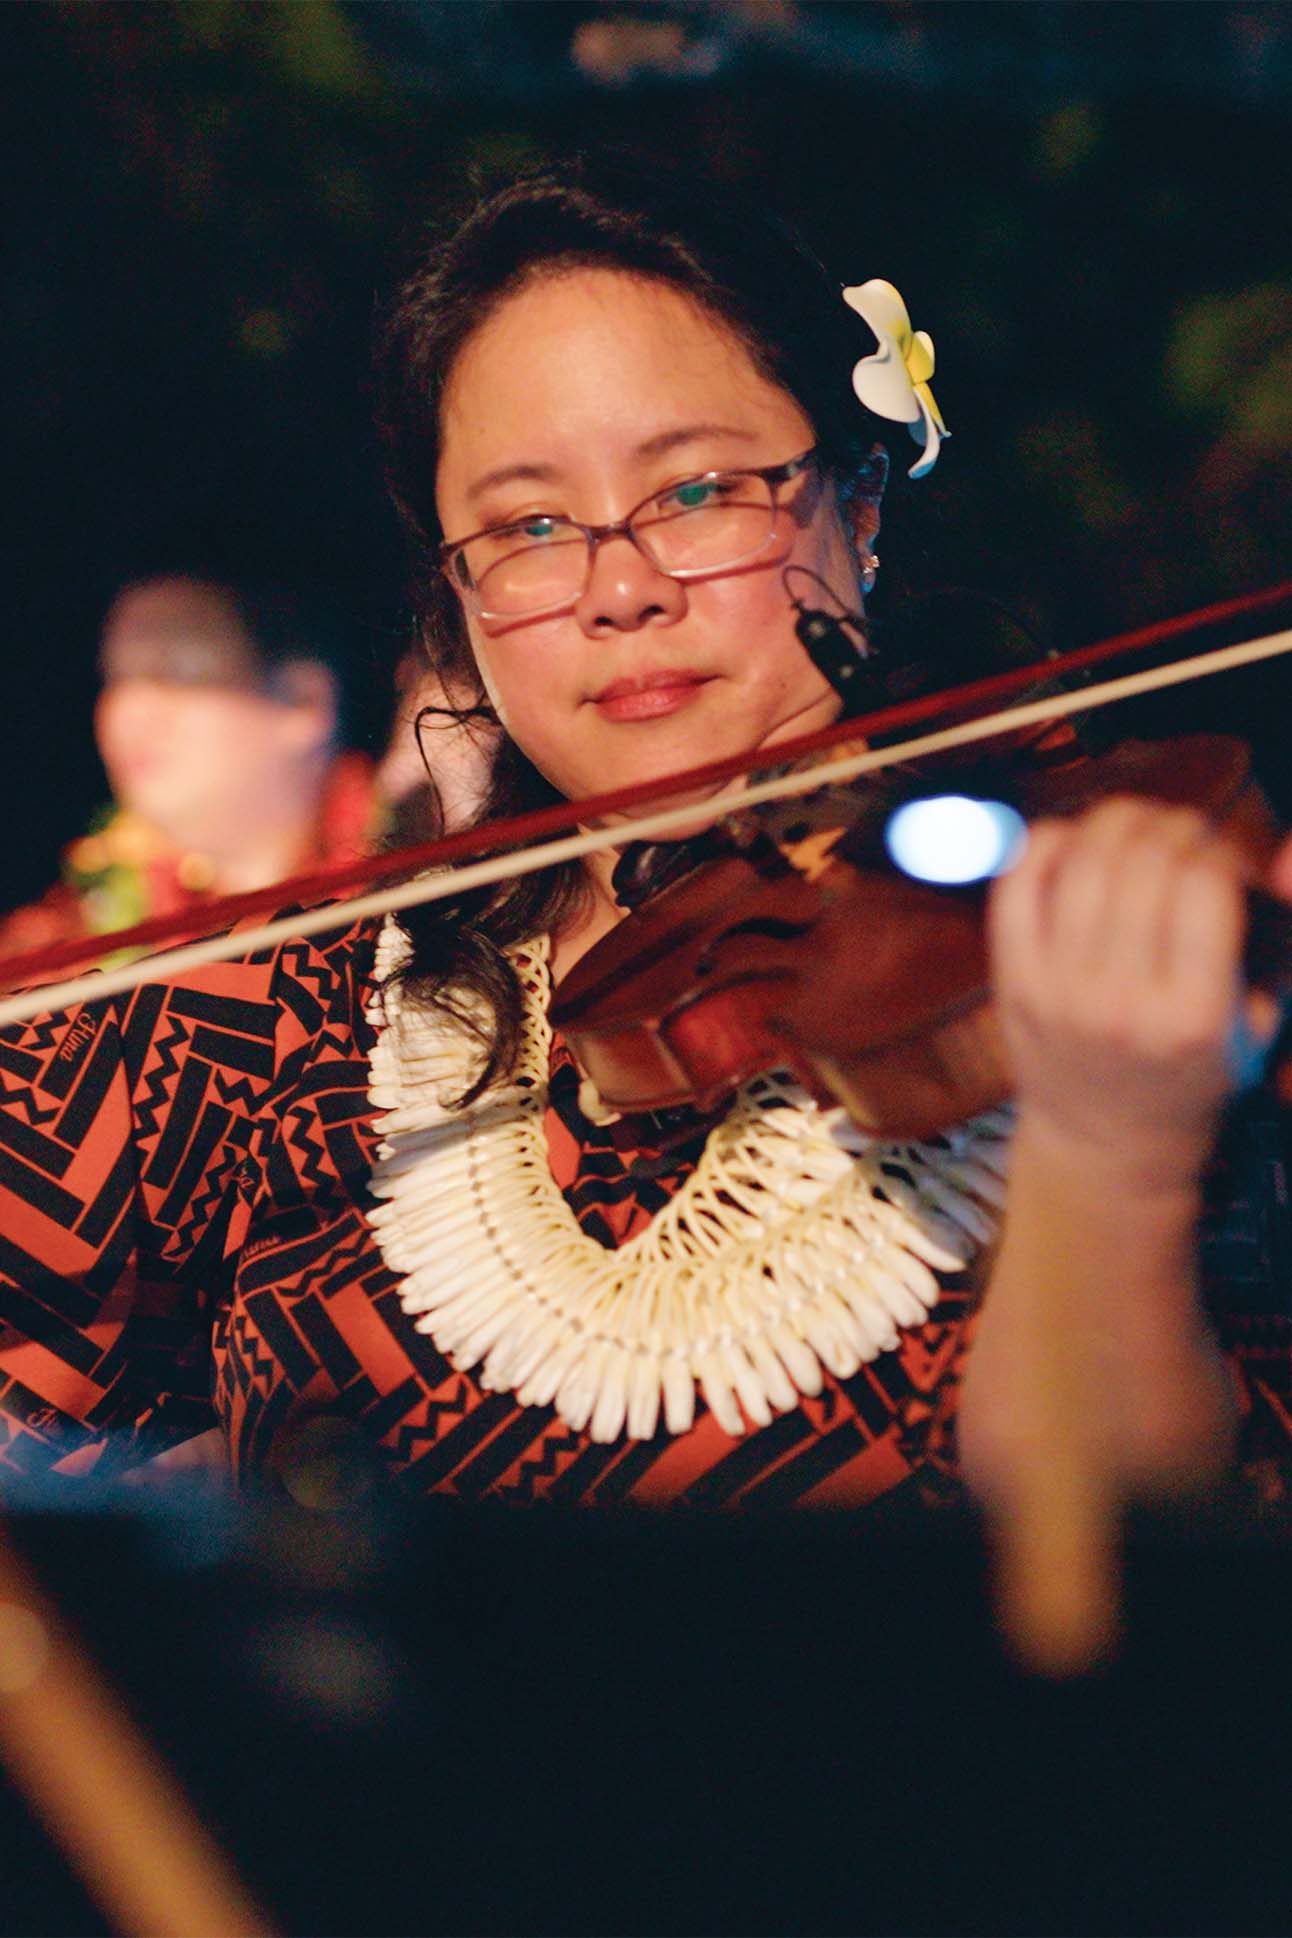 A person wearing a traditional patterned shirt and a shell lei plays the violin at a low-lit evening event, with a white flower tucked behind their ear.